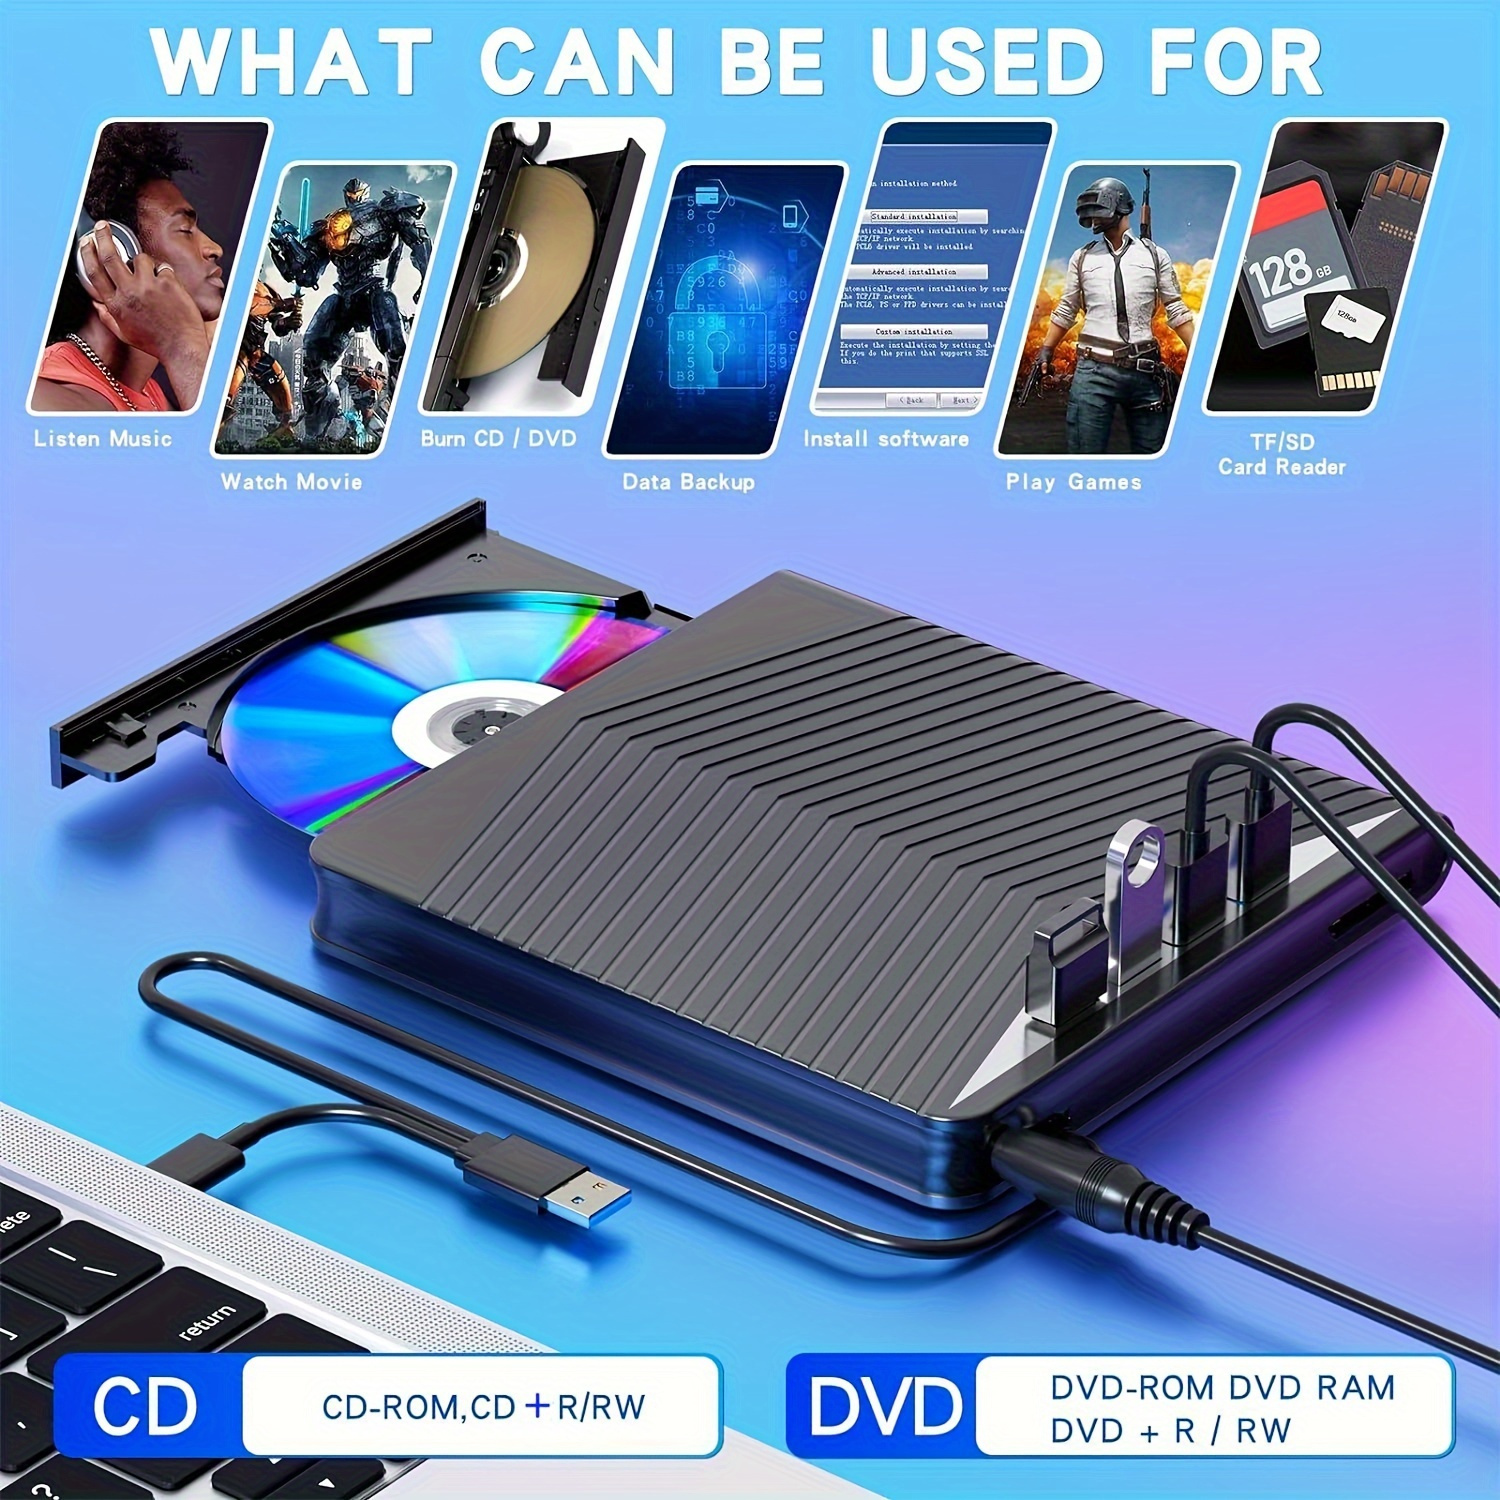 

Multifunctional External Cd Dvd Drive, Usb 3.0 Type-c Cd Dvd +/-rw Optical Drive Cd Burner, Ultra-slim Drive With 4 Usb Ports And Sd/tf Card Slots, Compatible With Linux Windows